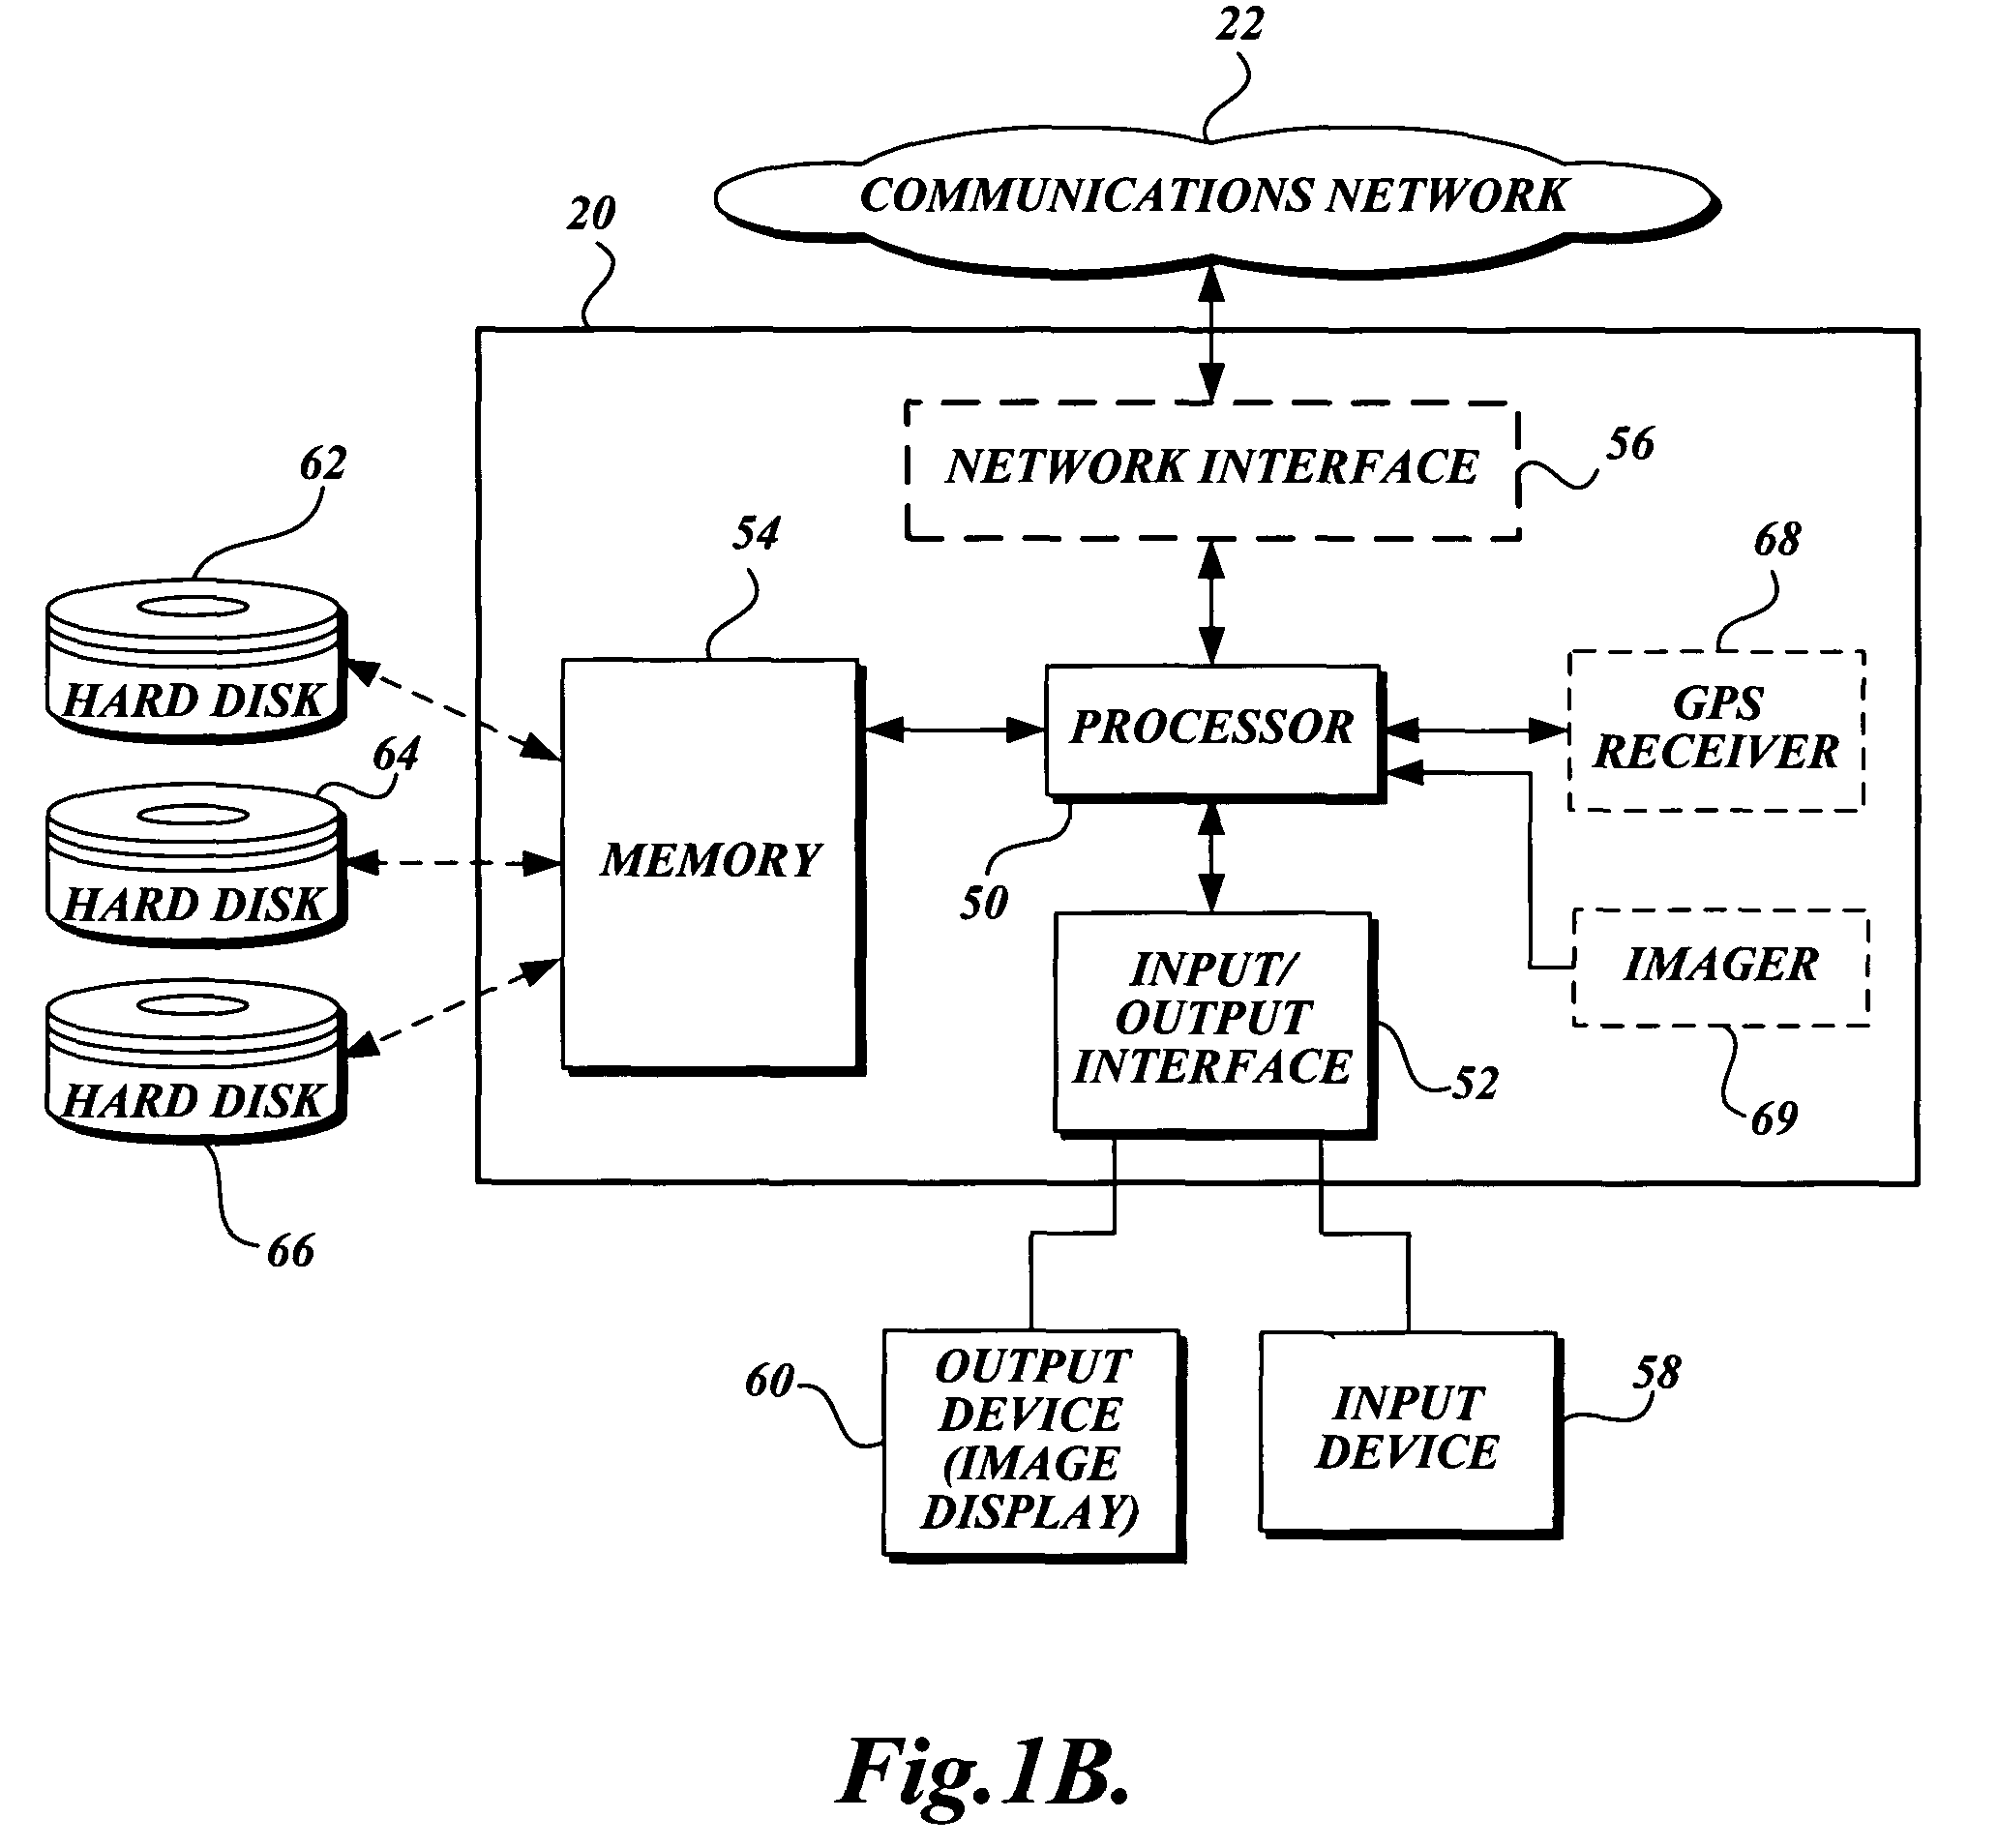 System and method for displaying location-specific images on a mobile device